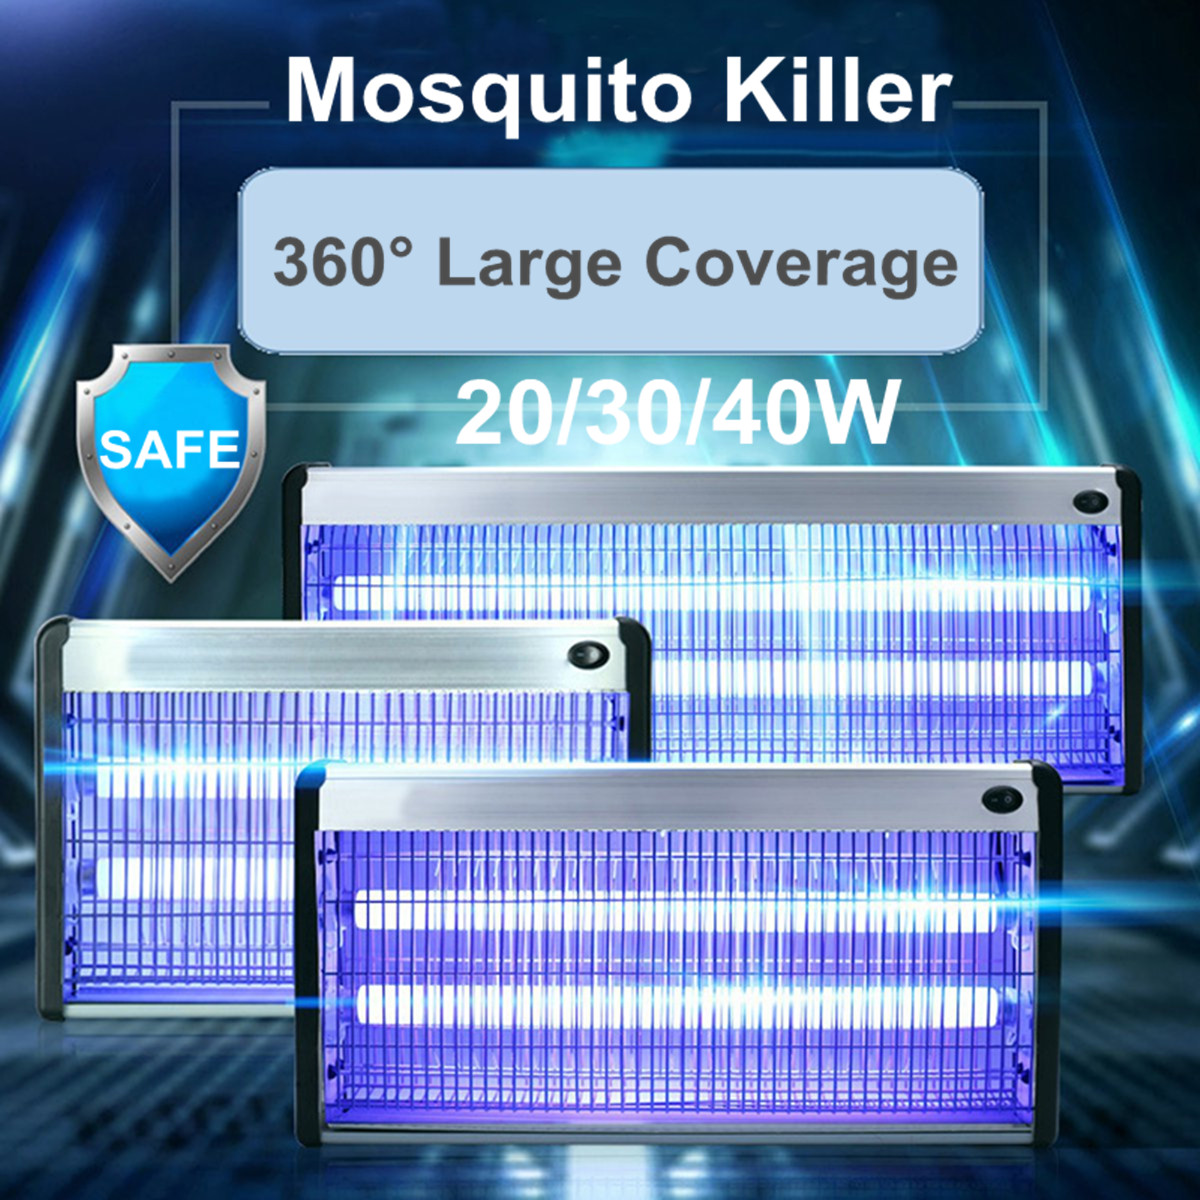 203040W-Electric-LED-Light-Mosquito-Killer-UV-A-Fly-Bug-Insect-Zapper-Trap-Catcher-Lamp-1421784-3